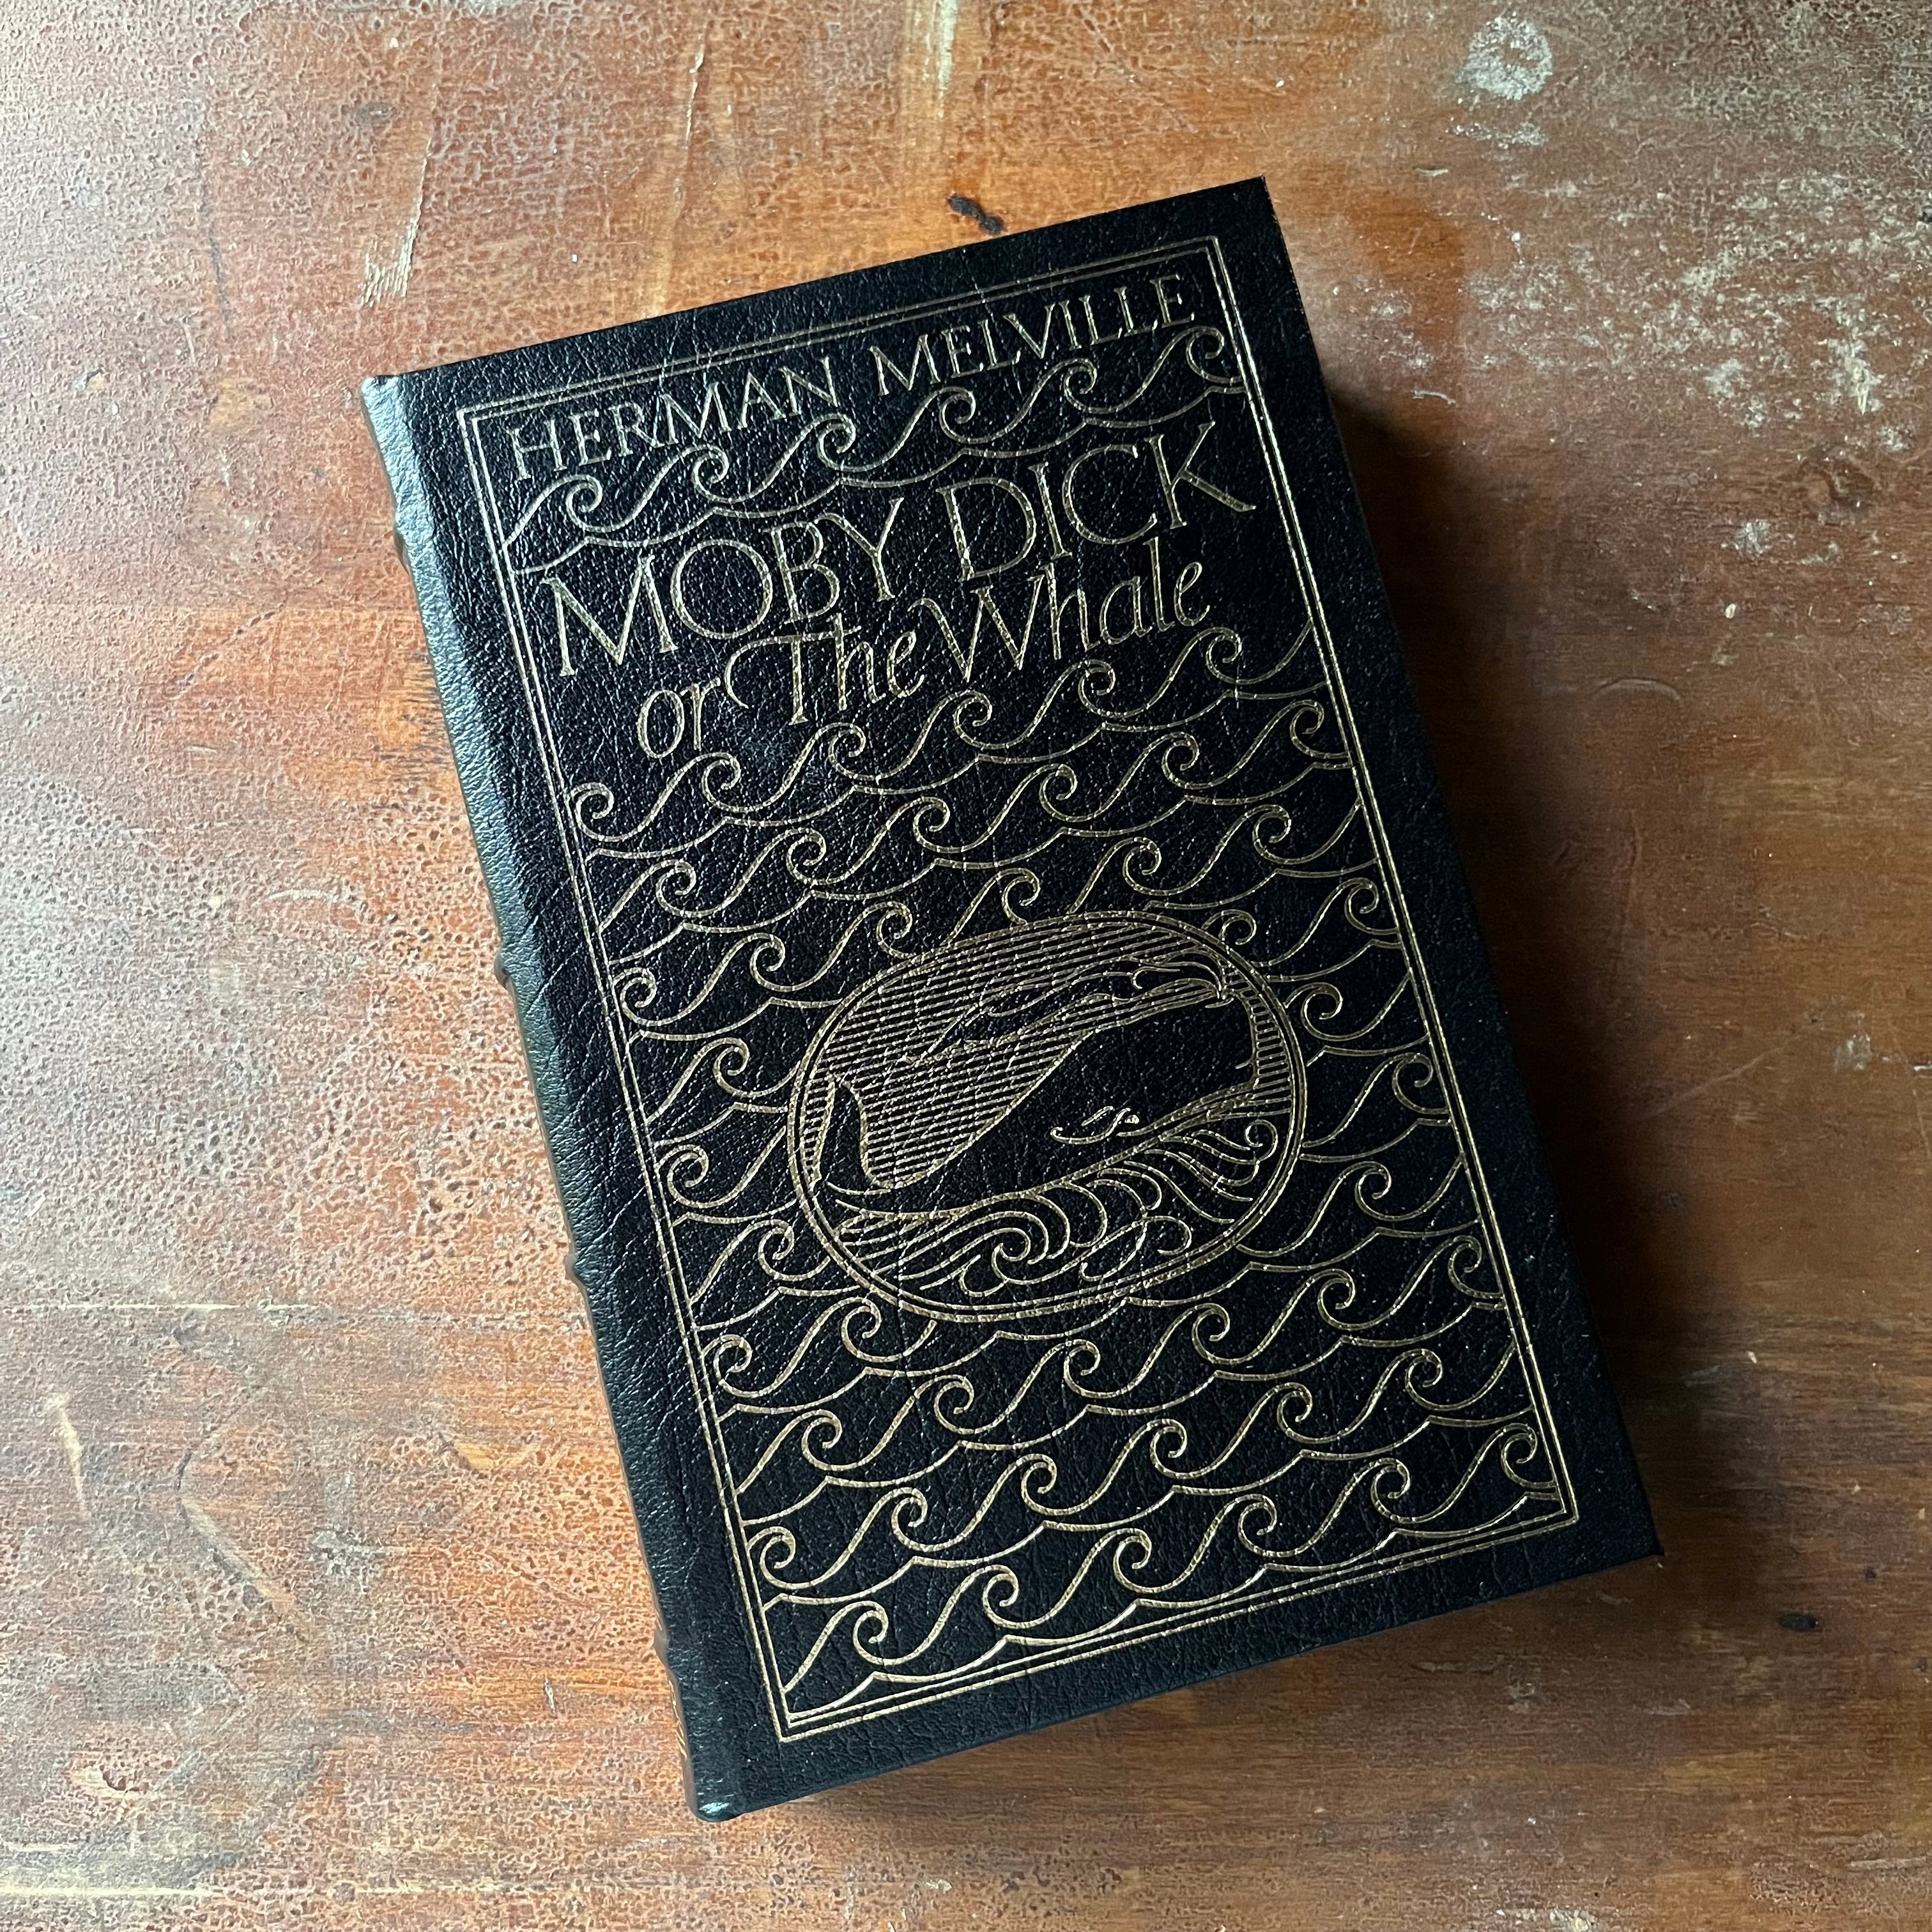  Moby Dick, Herman Melville whale literary gift